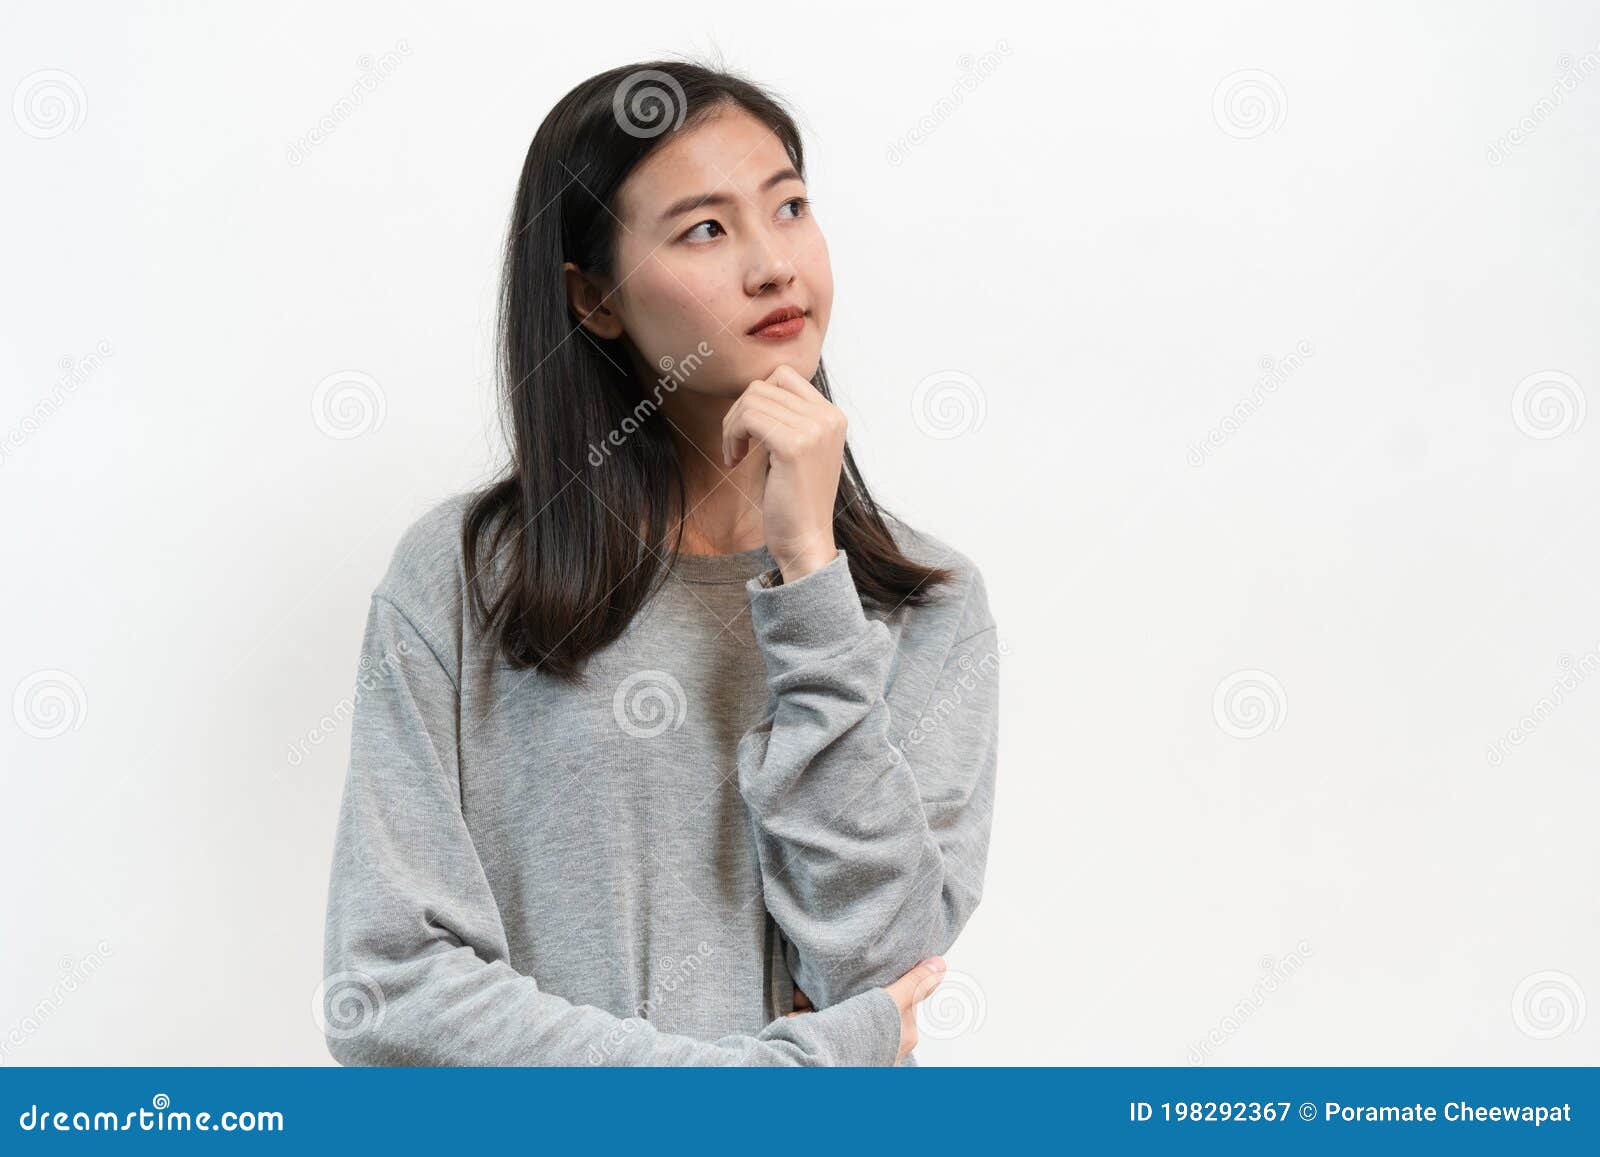 asian woman thoughtful thinking  on white back ground in studio